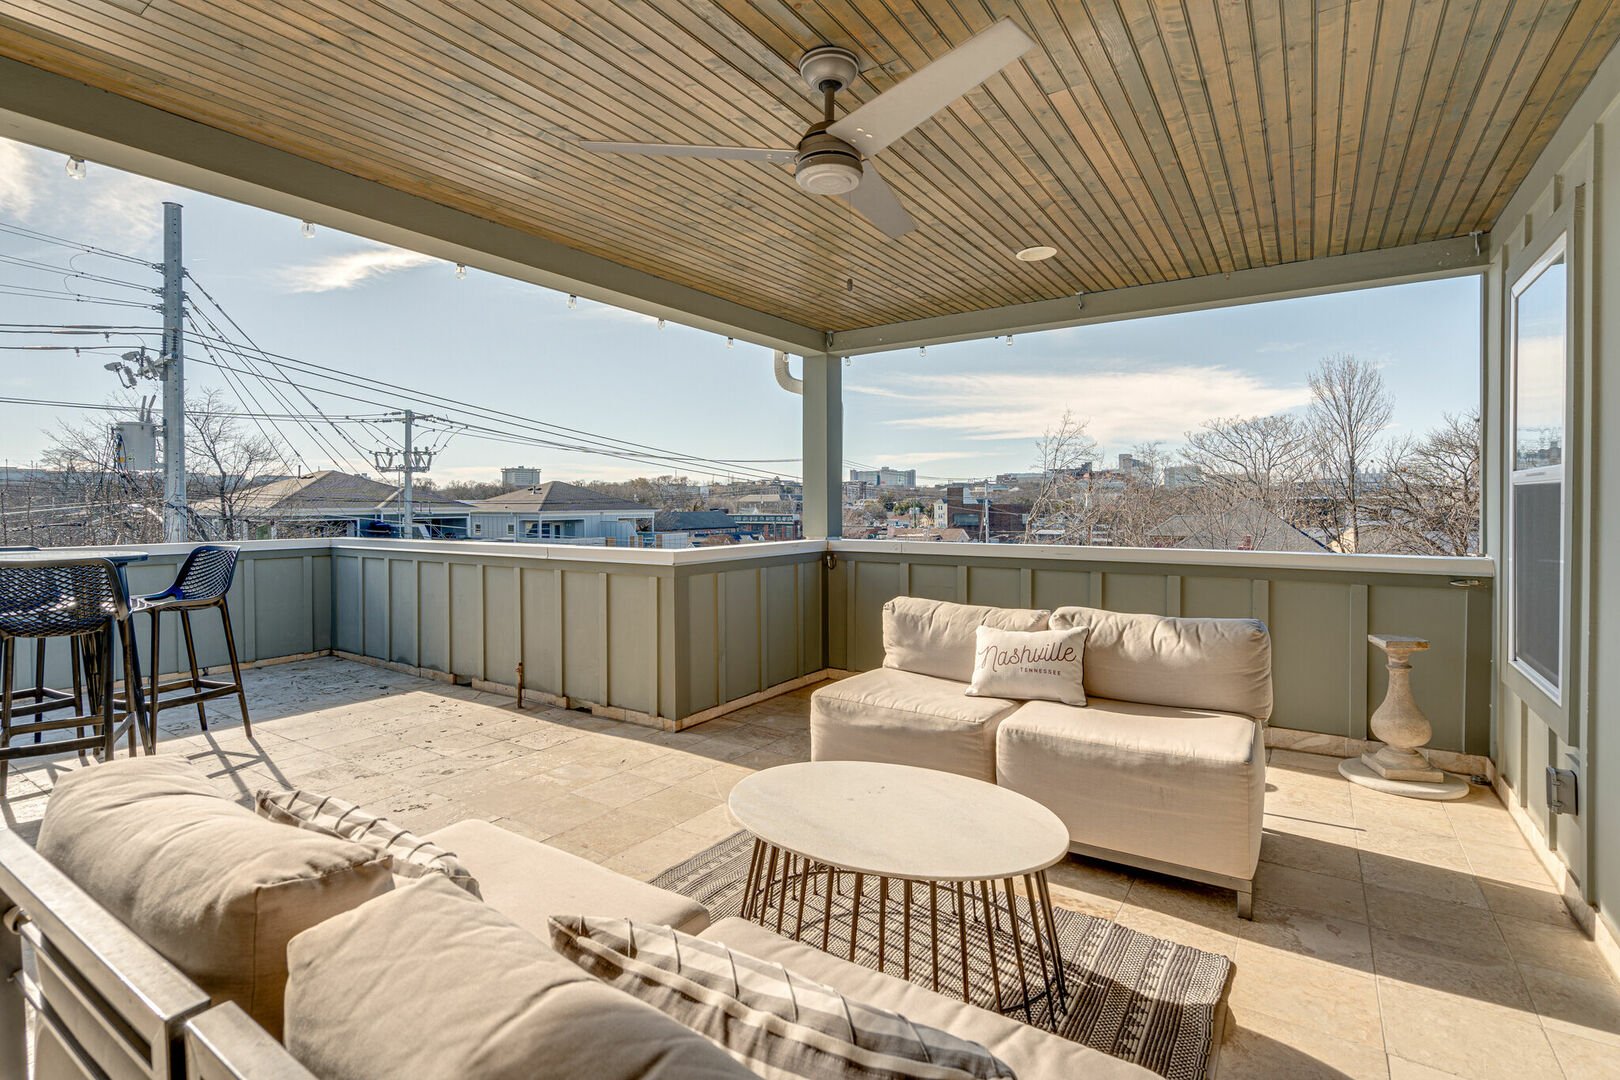 Private rooftop deck with outdoor dining, covered lounge area, ceiling fans, smart TV and views of downtown.